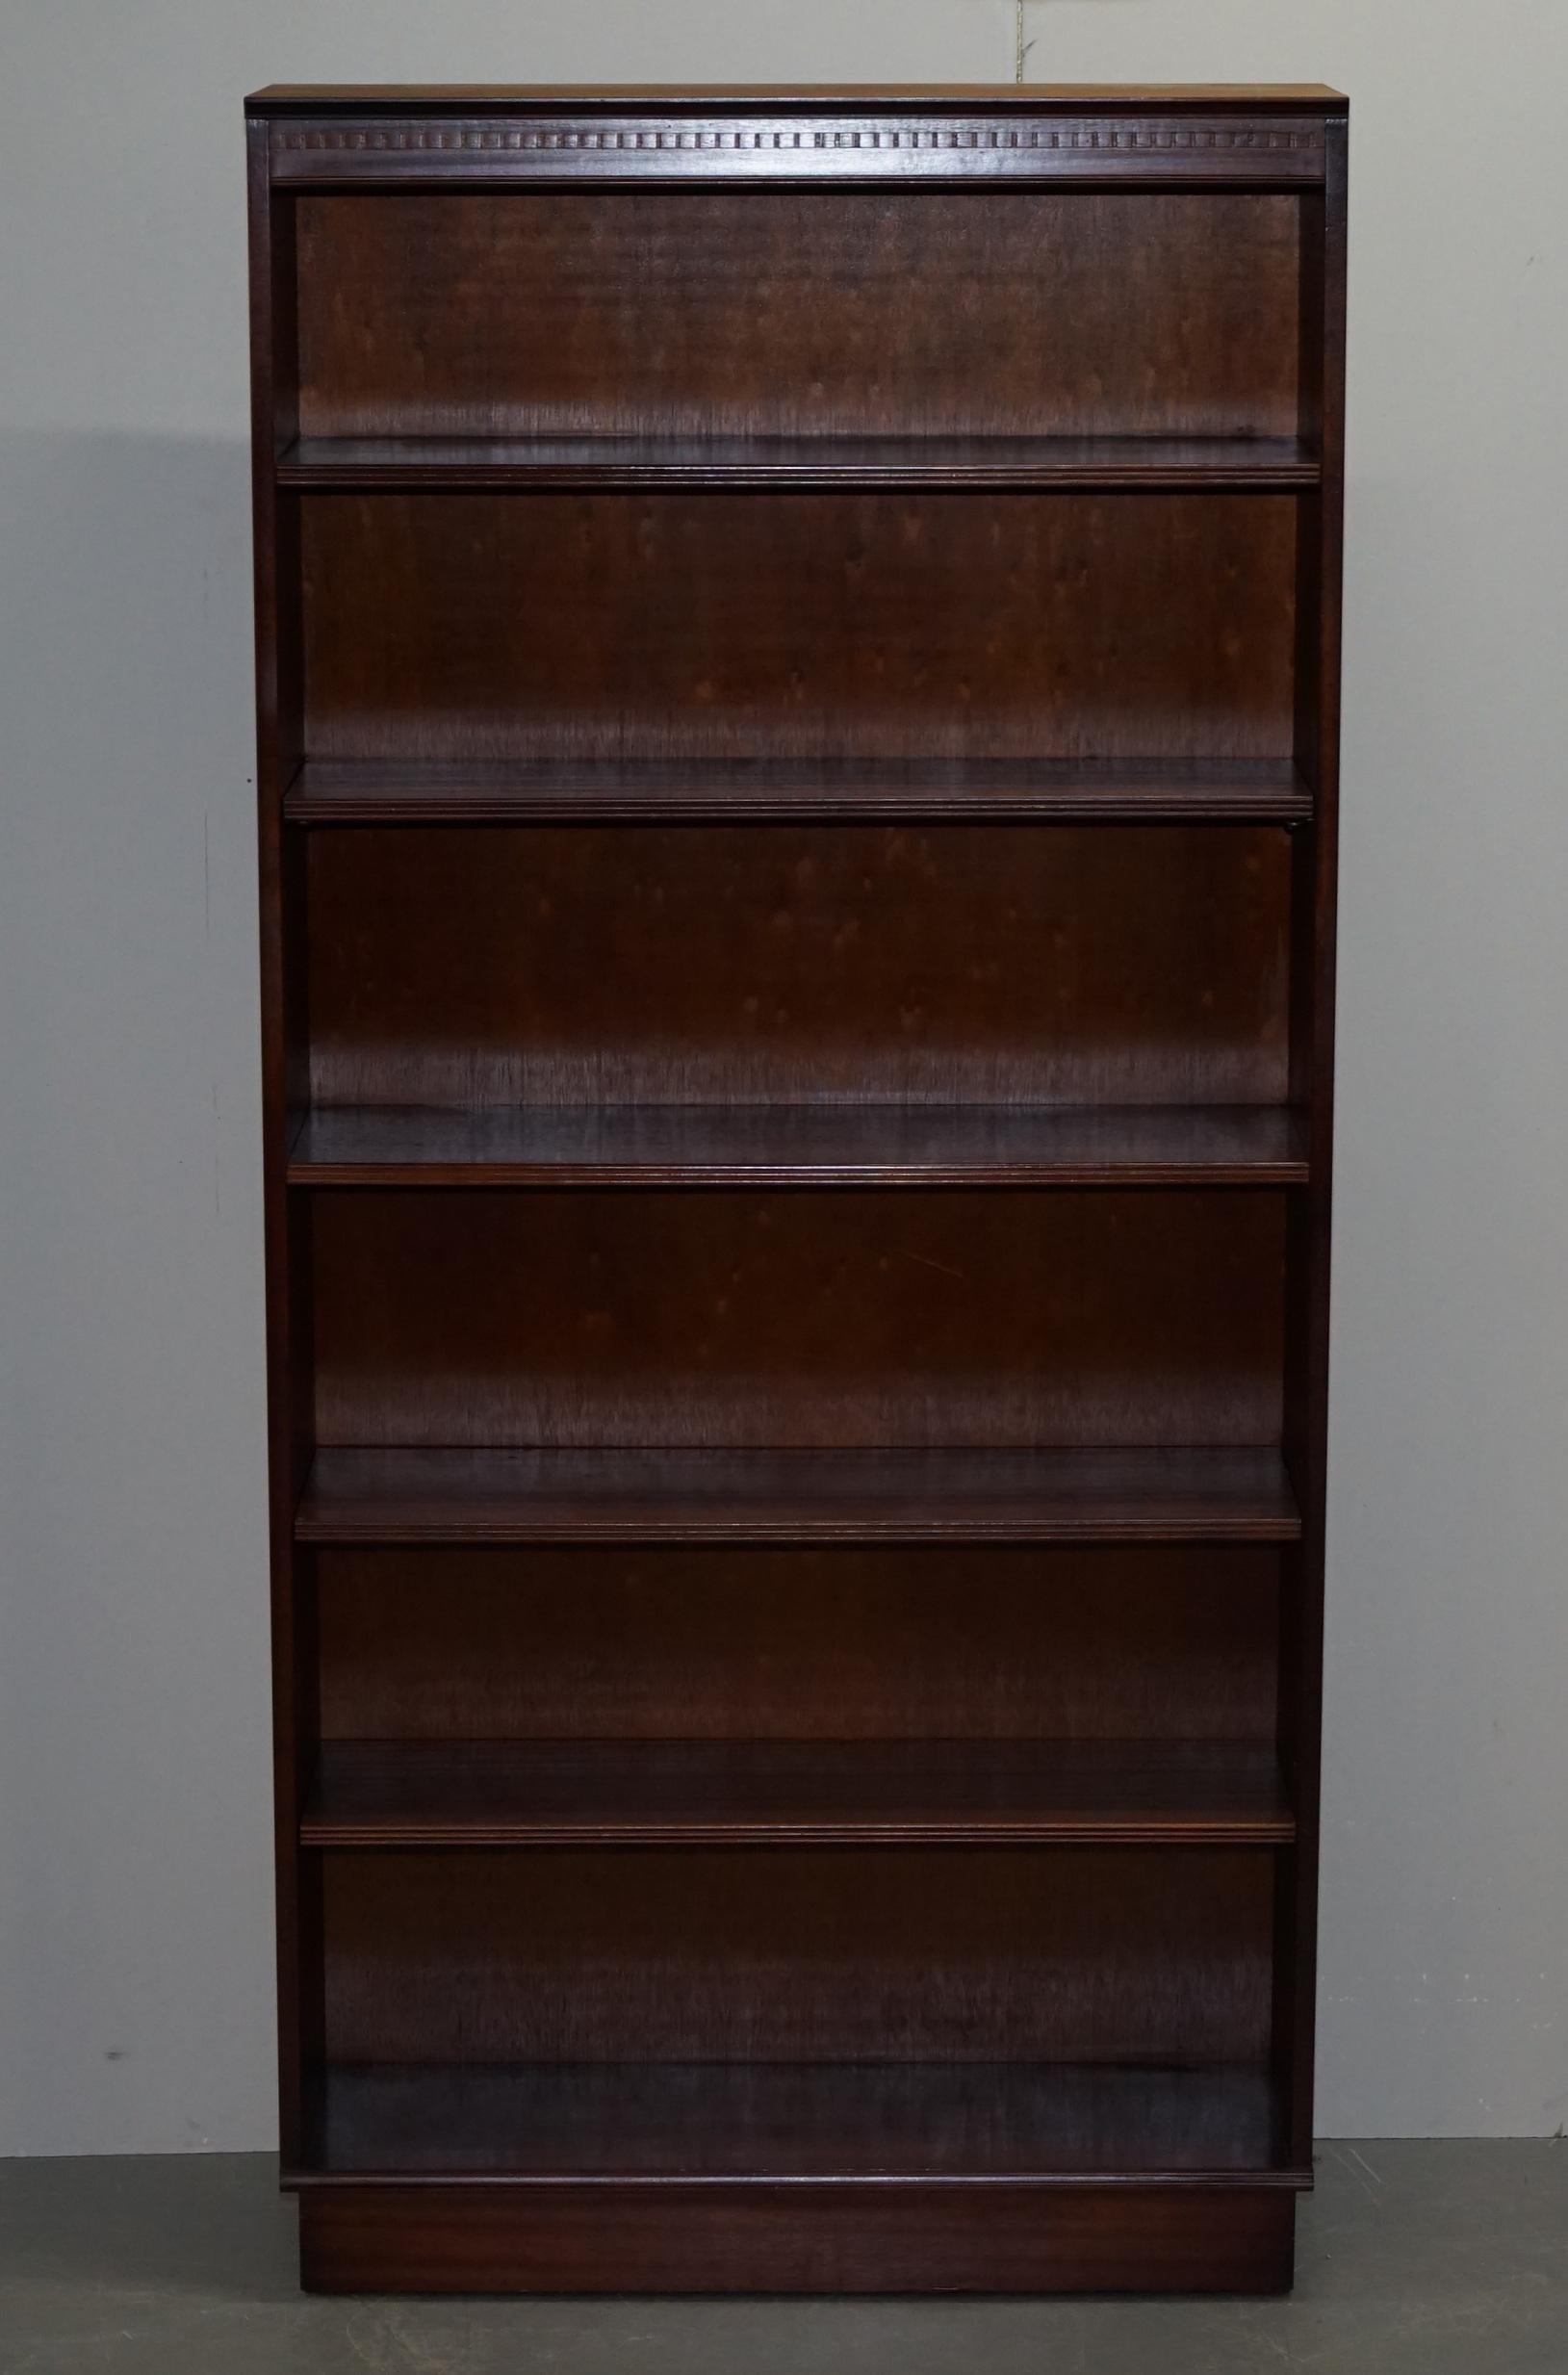 We are delighted to offer for sale this lovely Bradley Furniture England 1989 mahogany library bookcase with height adjustable shelves

A nice looking hand made in England Library bookcase. This is a very utilitarian piece with most of the shelves